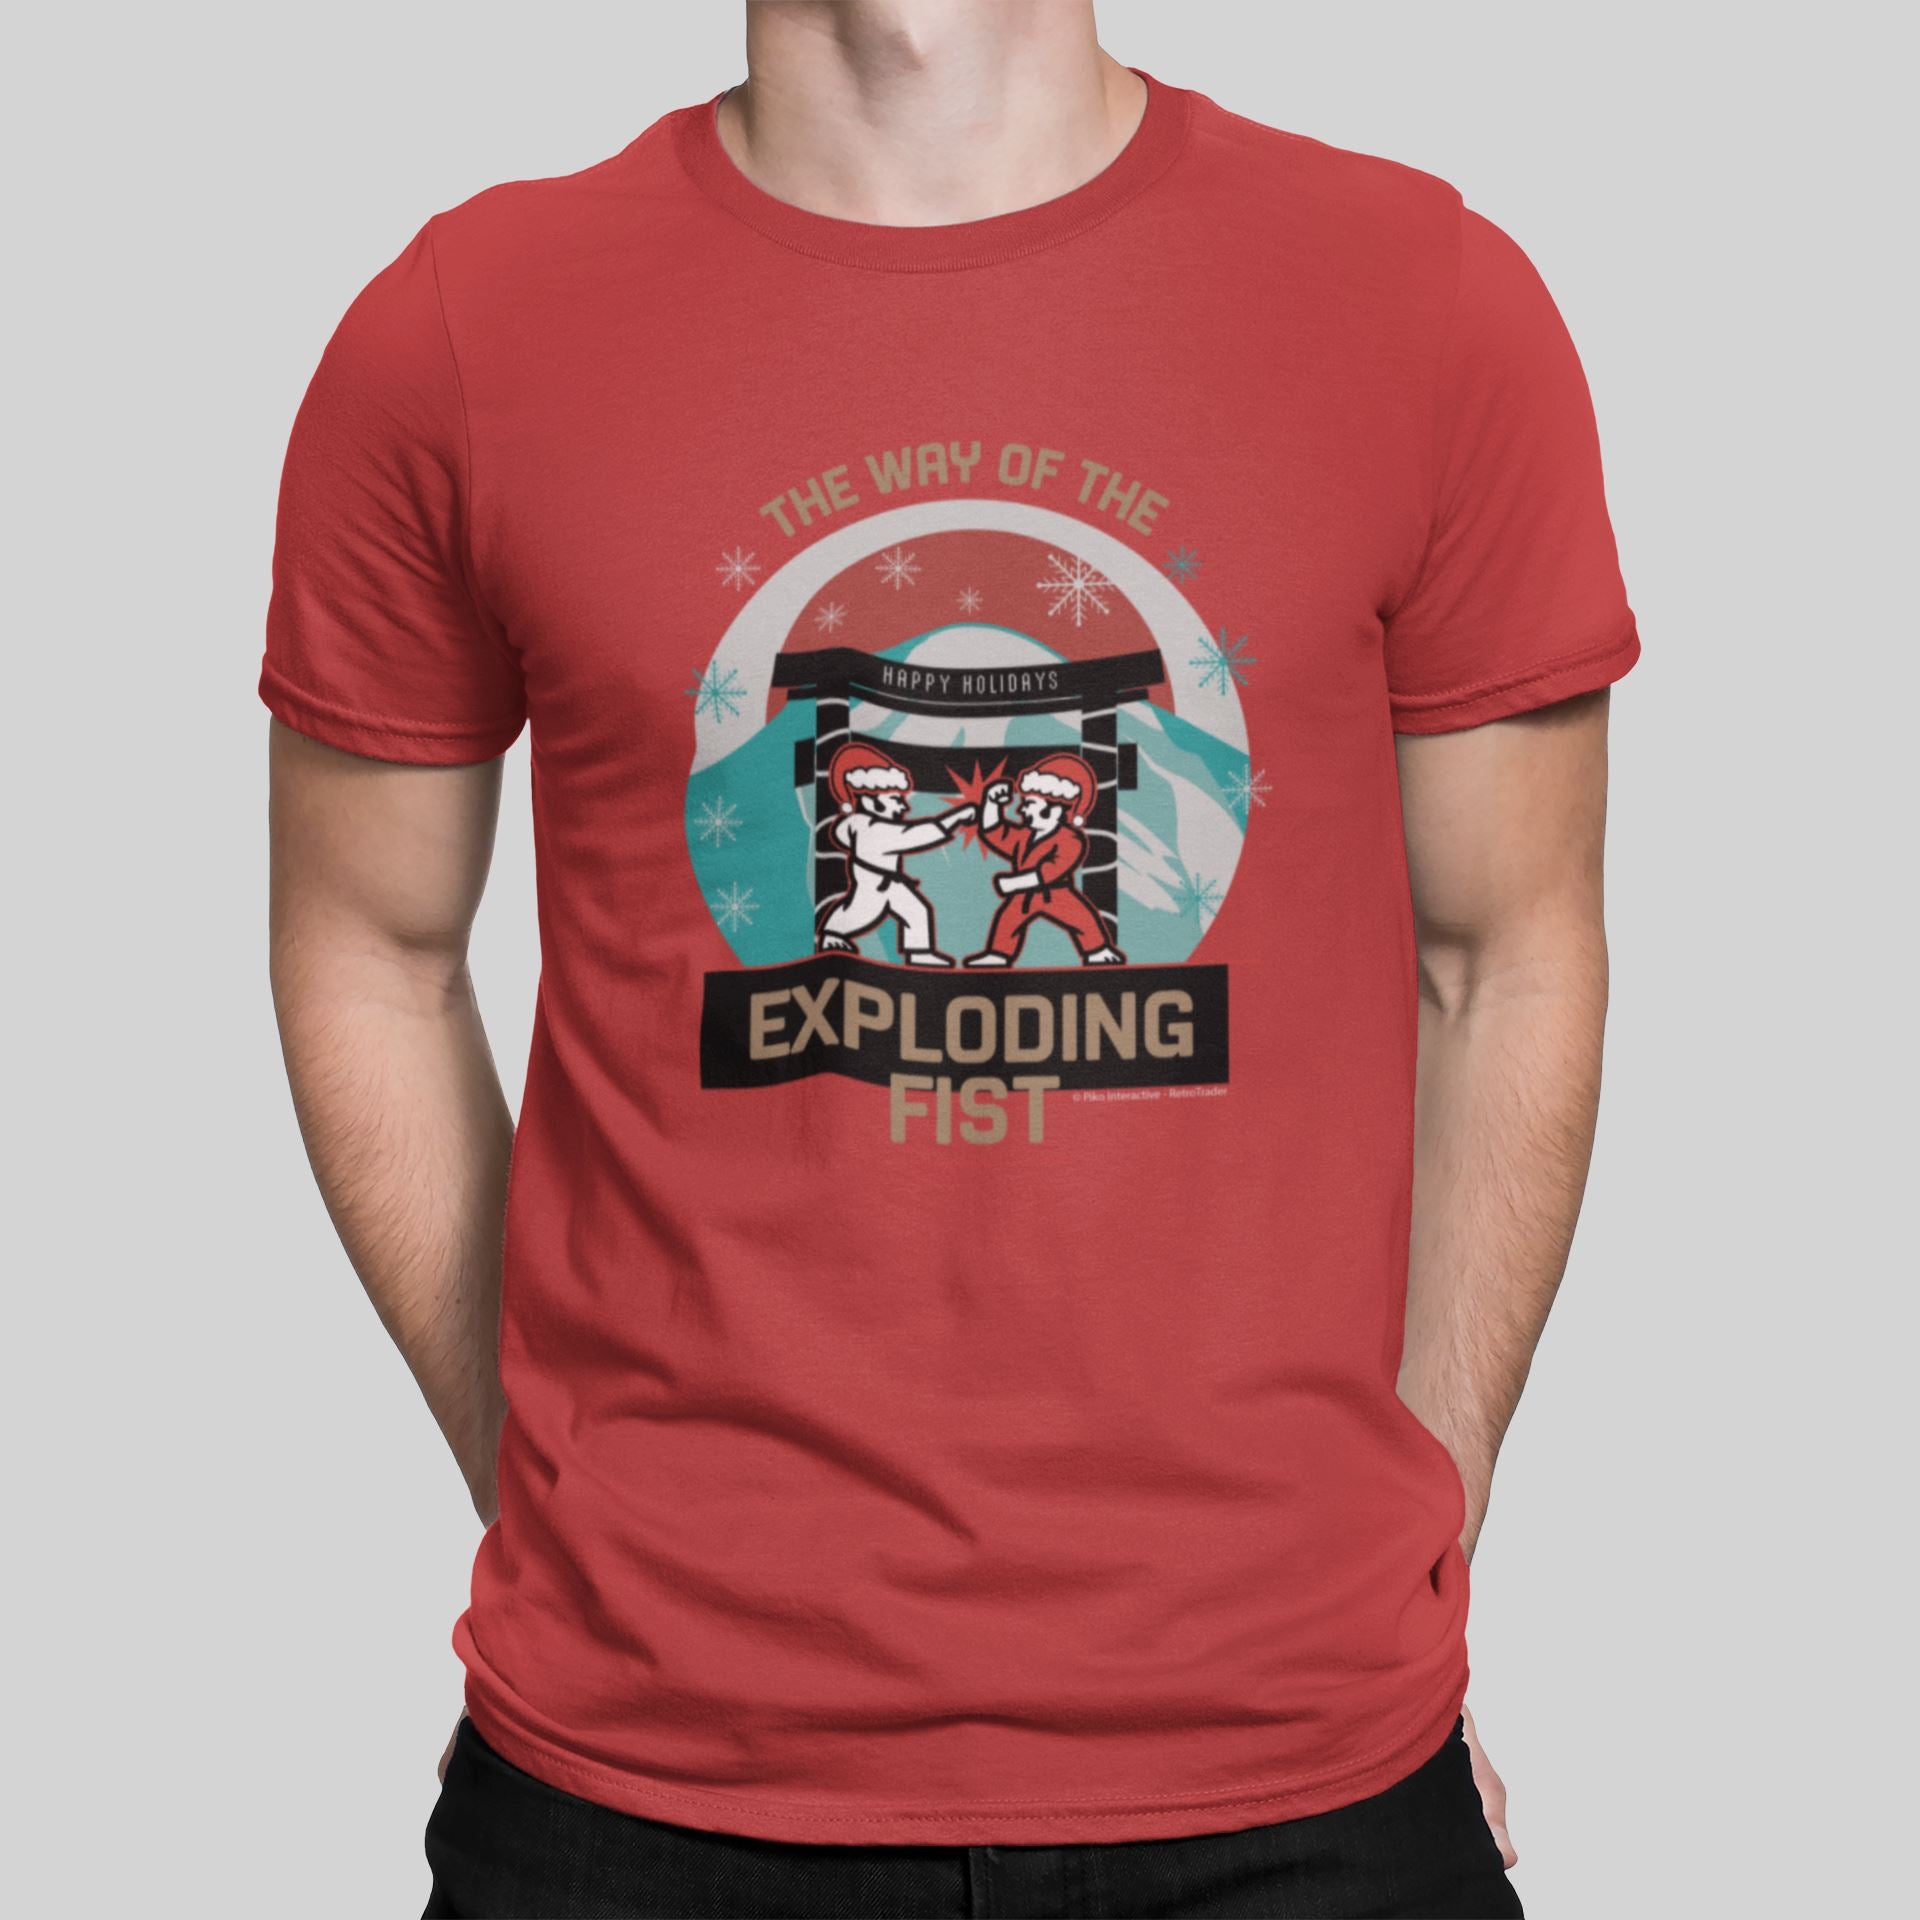 Way Of The Exploding Fist Christmas Ltd Edition Retro Gaming T-Shirt T-Shirt Seven Squared Small 34-36" Red 